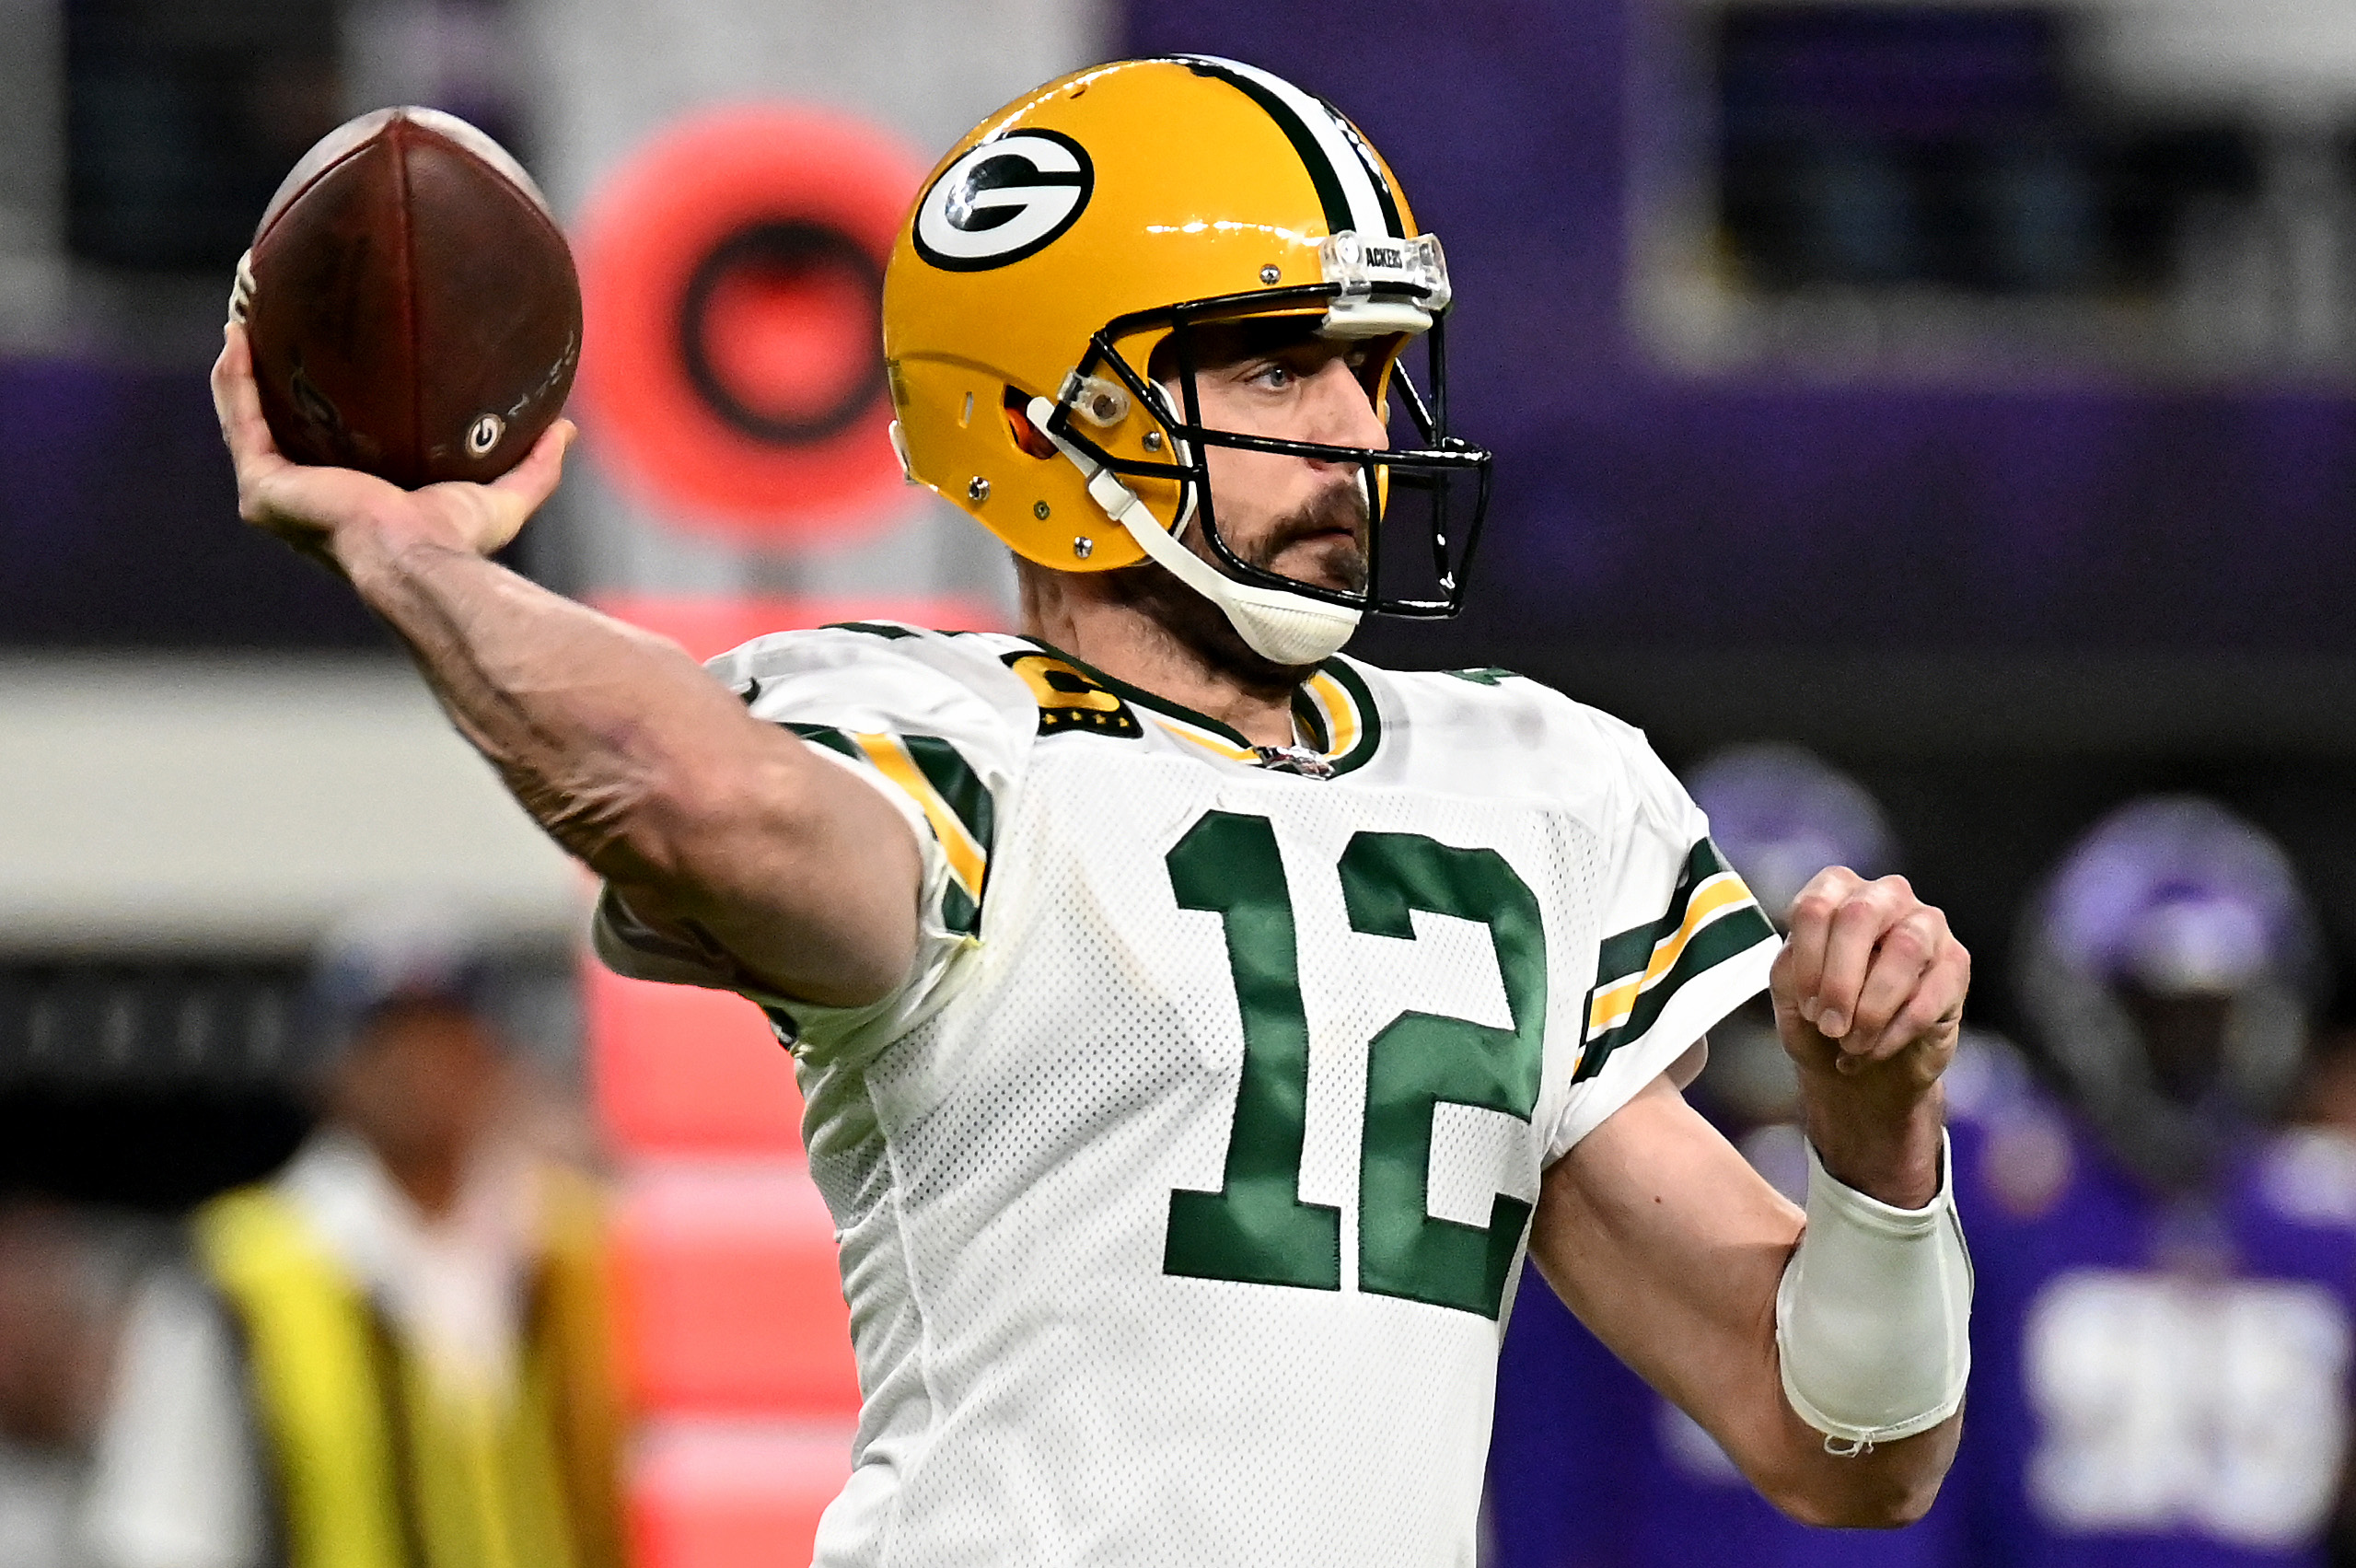 Aaron Rodgers, Green Bay Packers quarterback, currently has strong odds of winning Super Bowl 2022